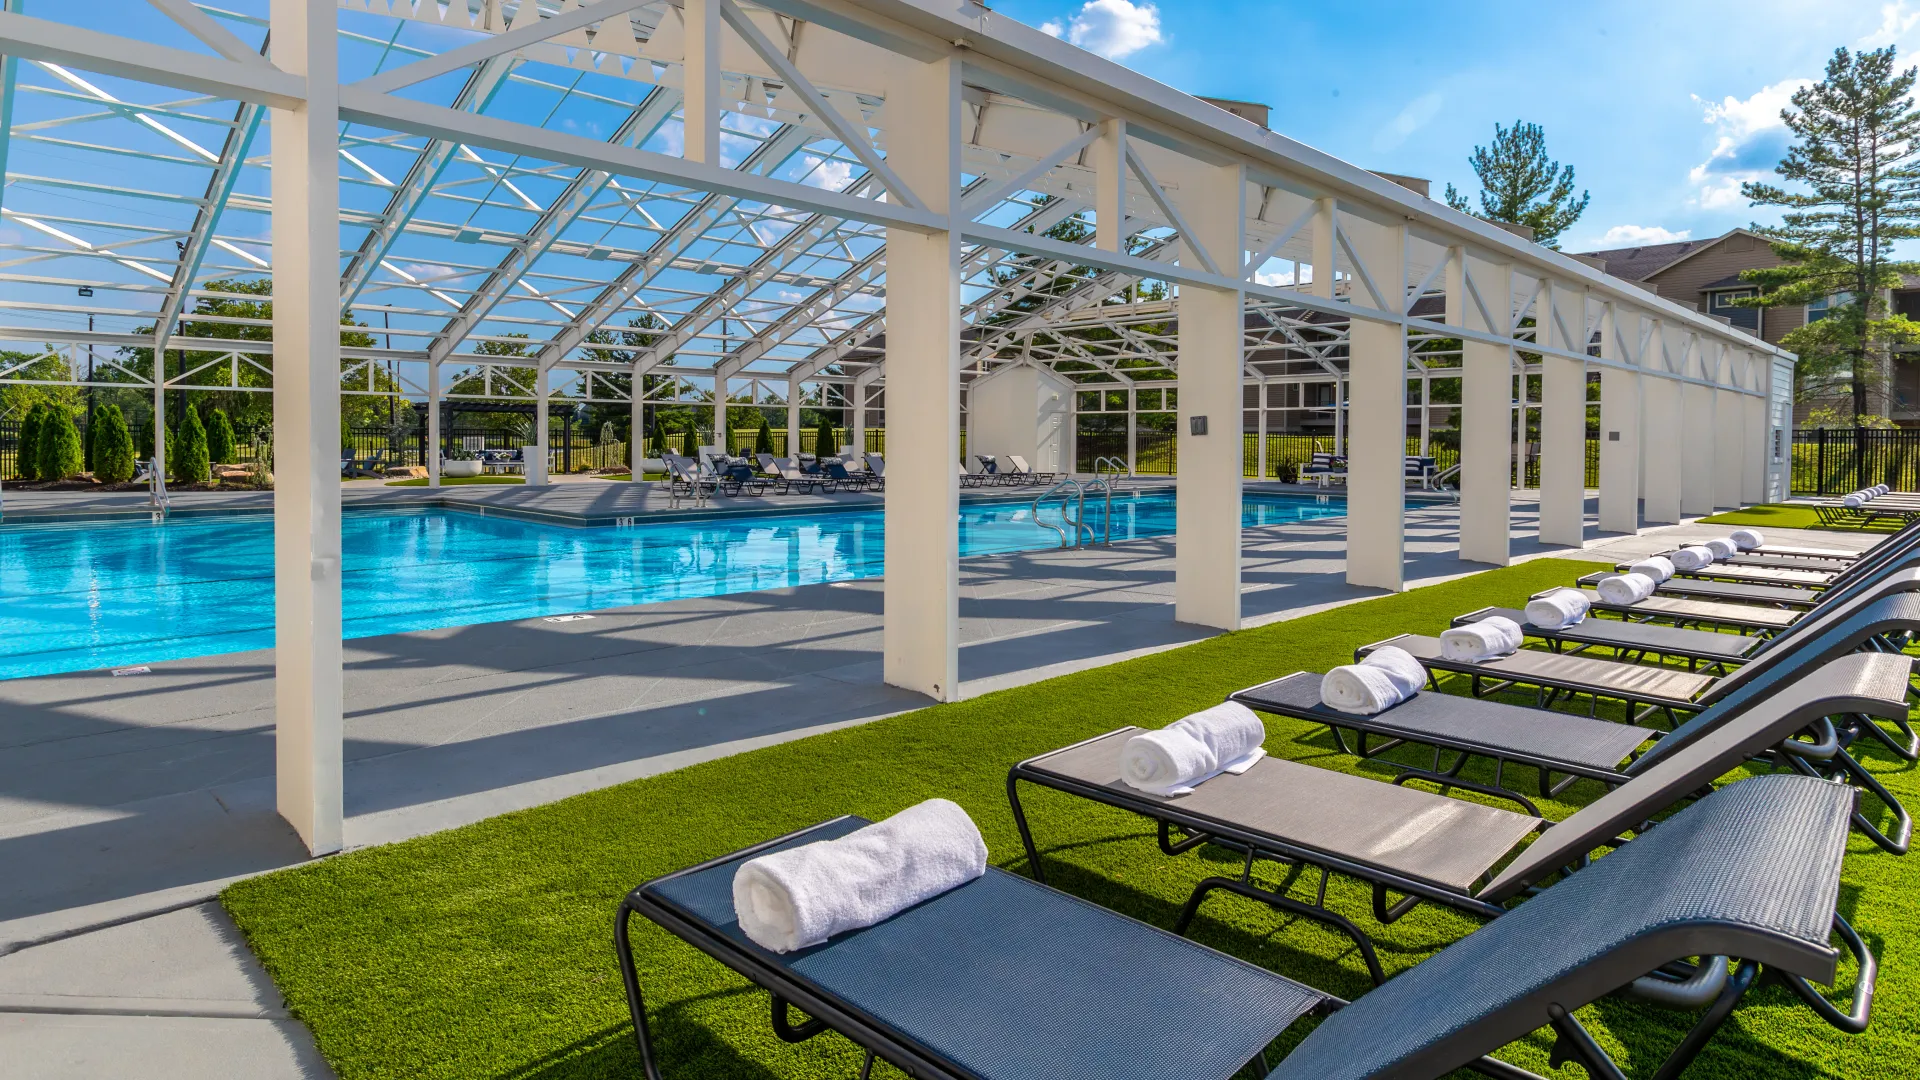 Pool deck featuring a row of loungers with rolled towels beside a clear blue pool under a modern, partially enclosed structure.